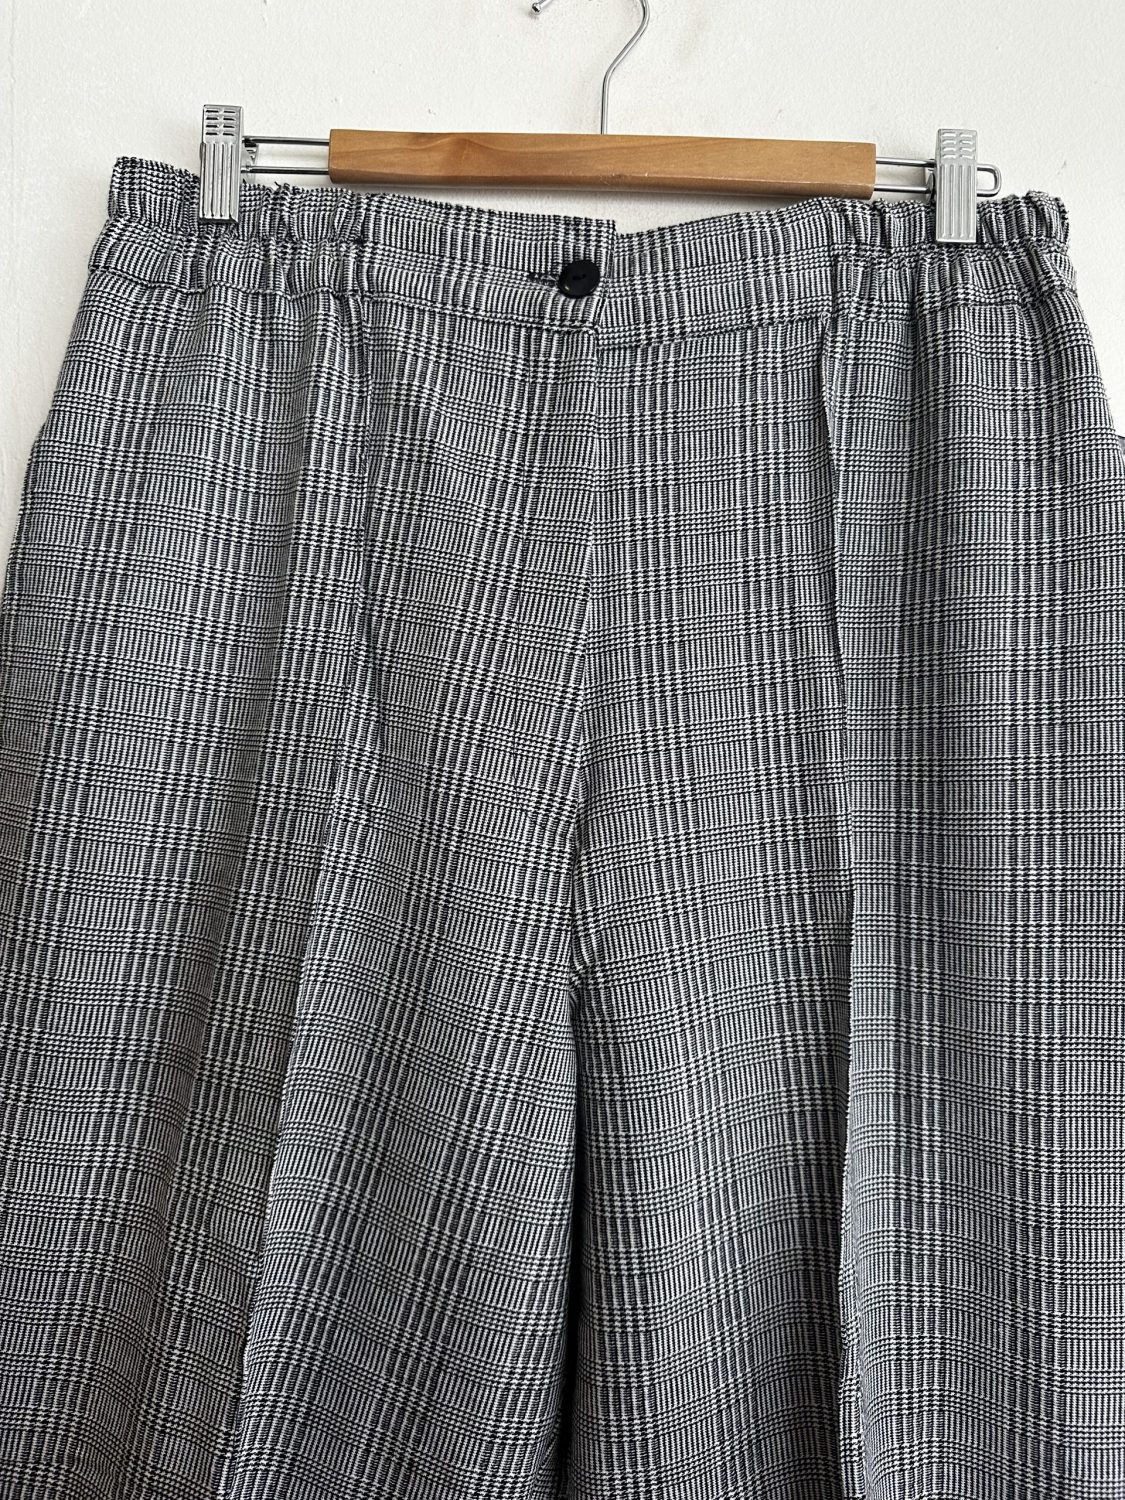 1980s HIGH WAISTED BLACK AND WHITE CHECK STIRRUP PANTS | Chaos Bazaar ...